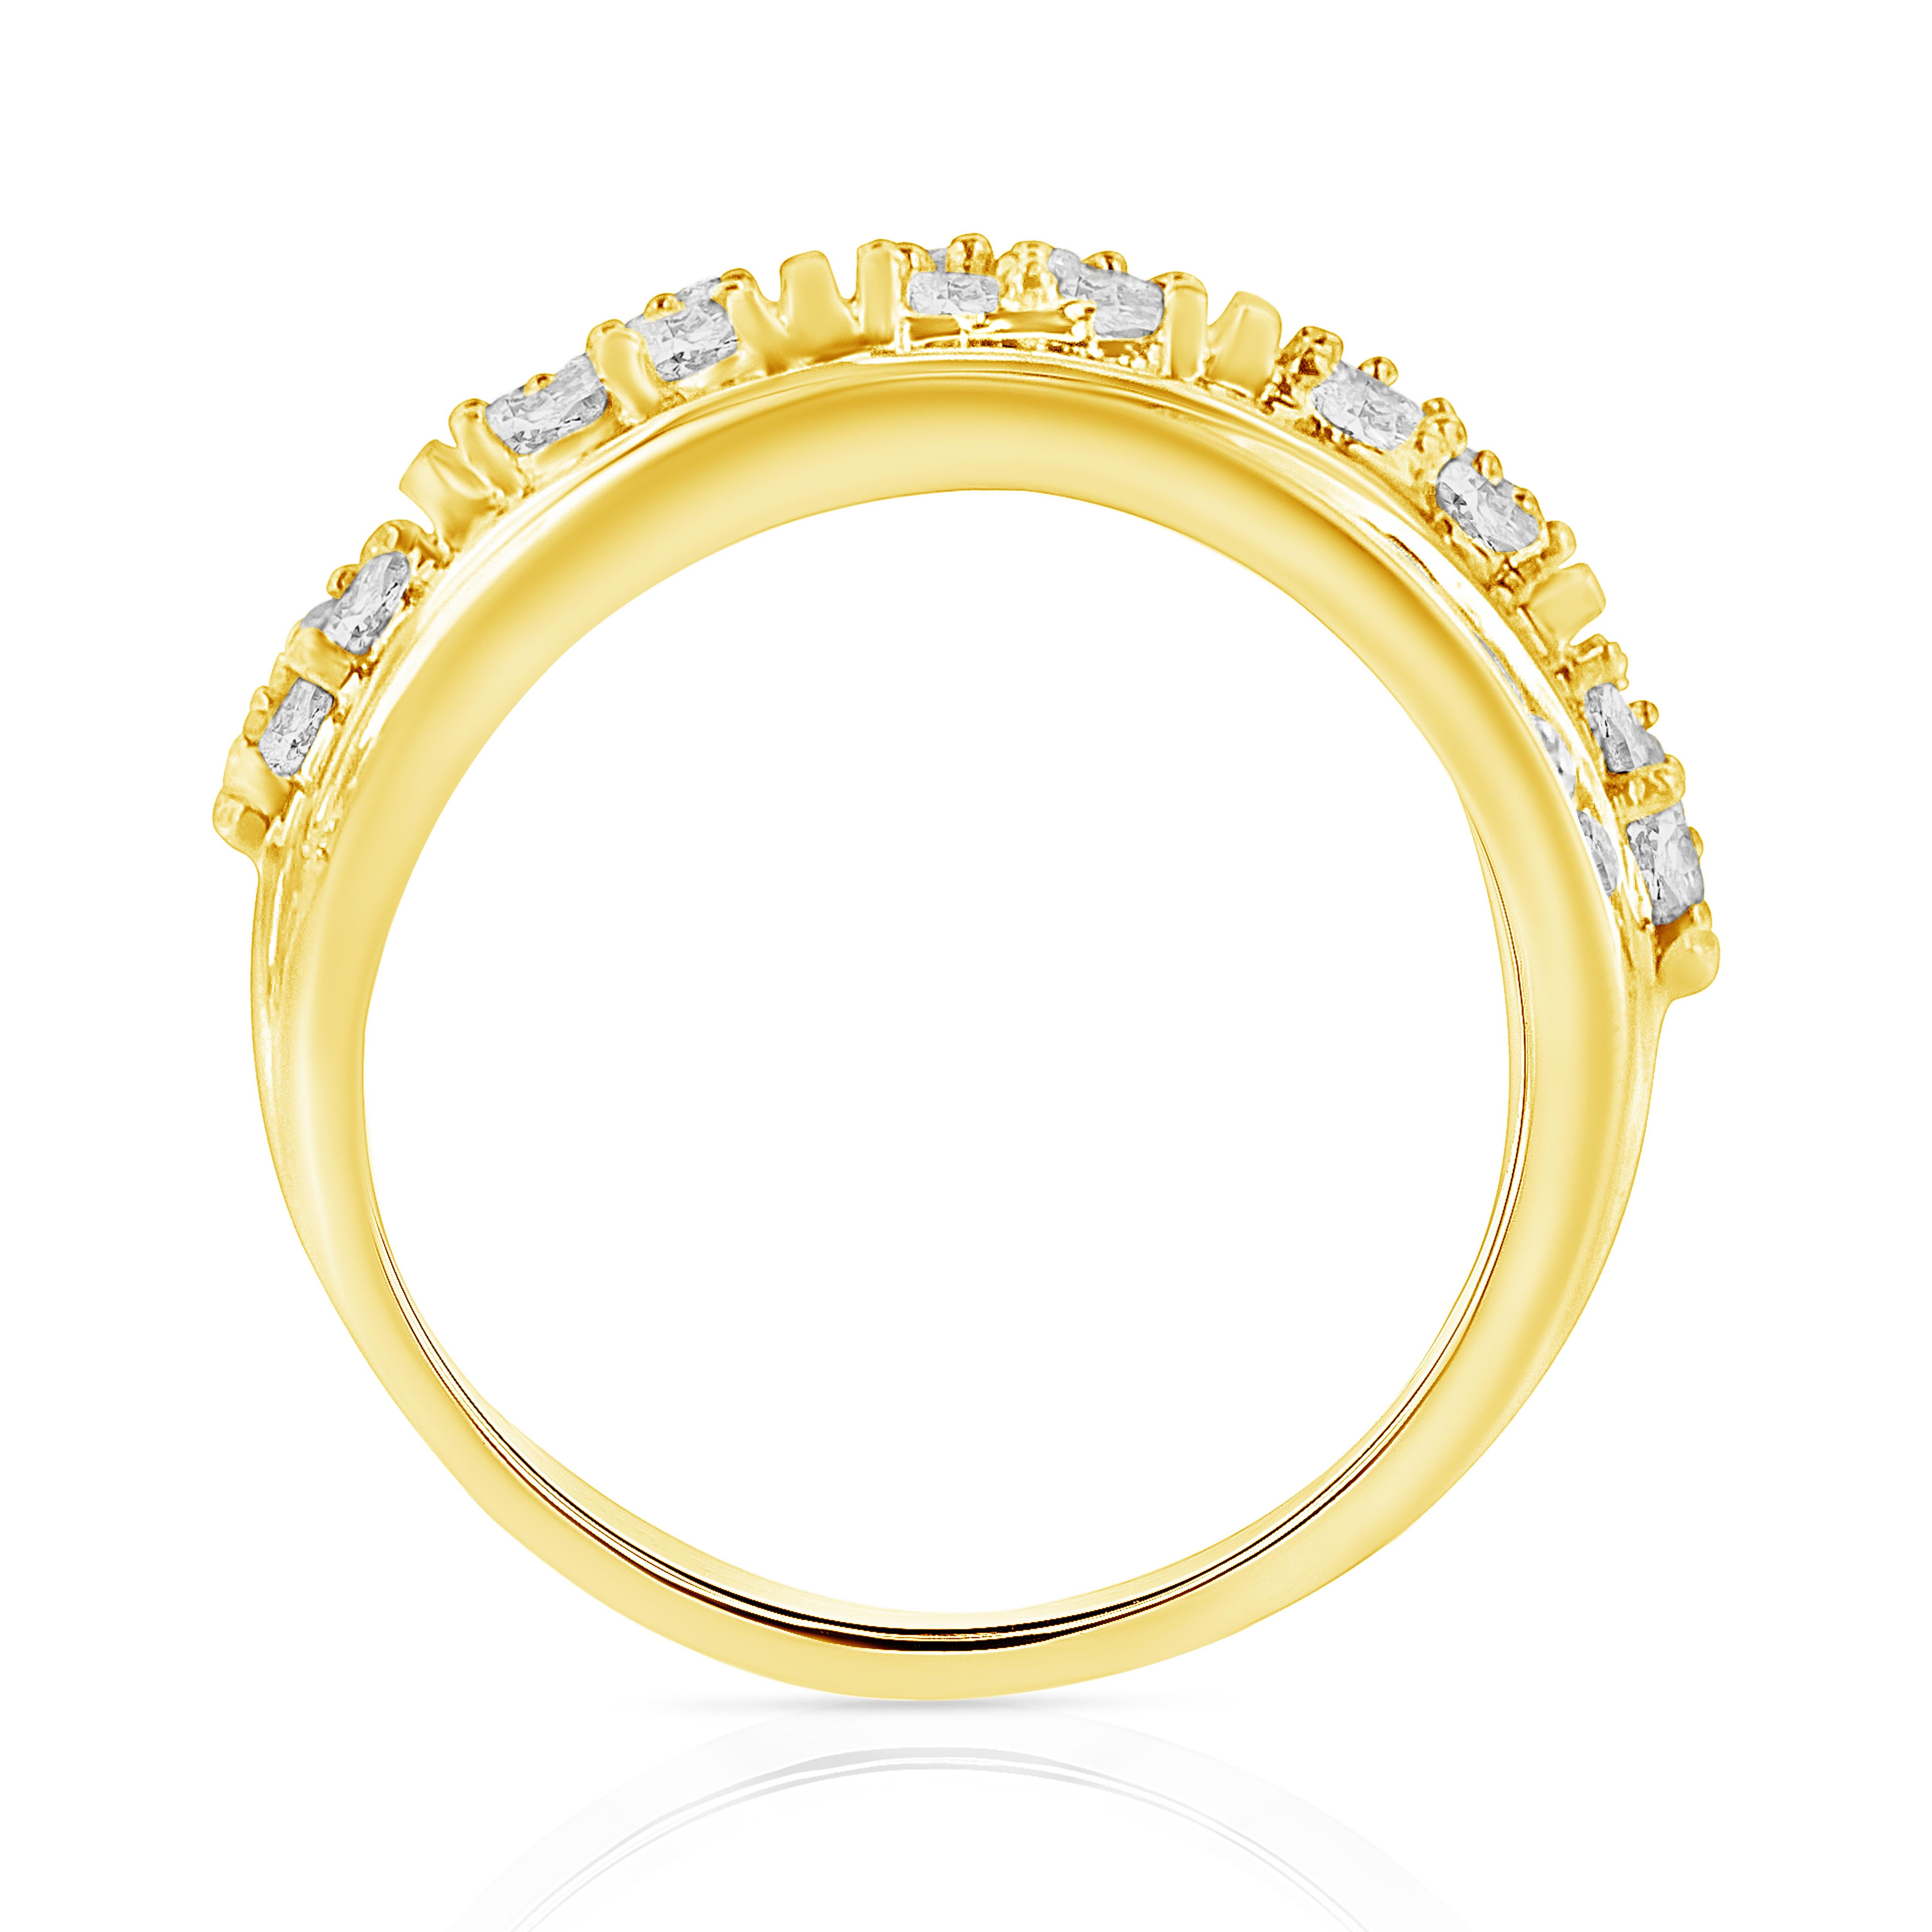 For Sale:  10k Yellow Gold over Sterling Silver 2.0 Carat Diamond Cocktail Fashion Ring 4